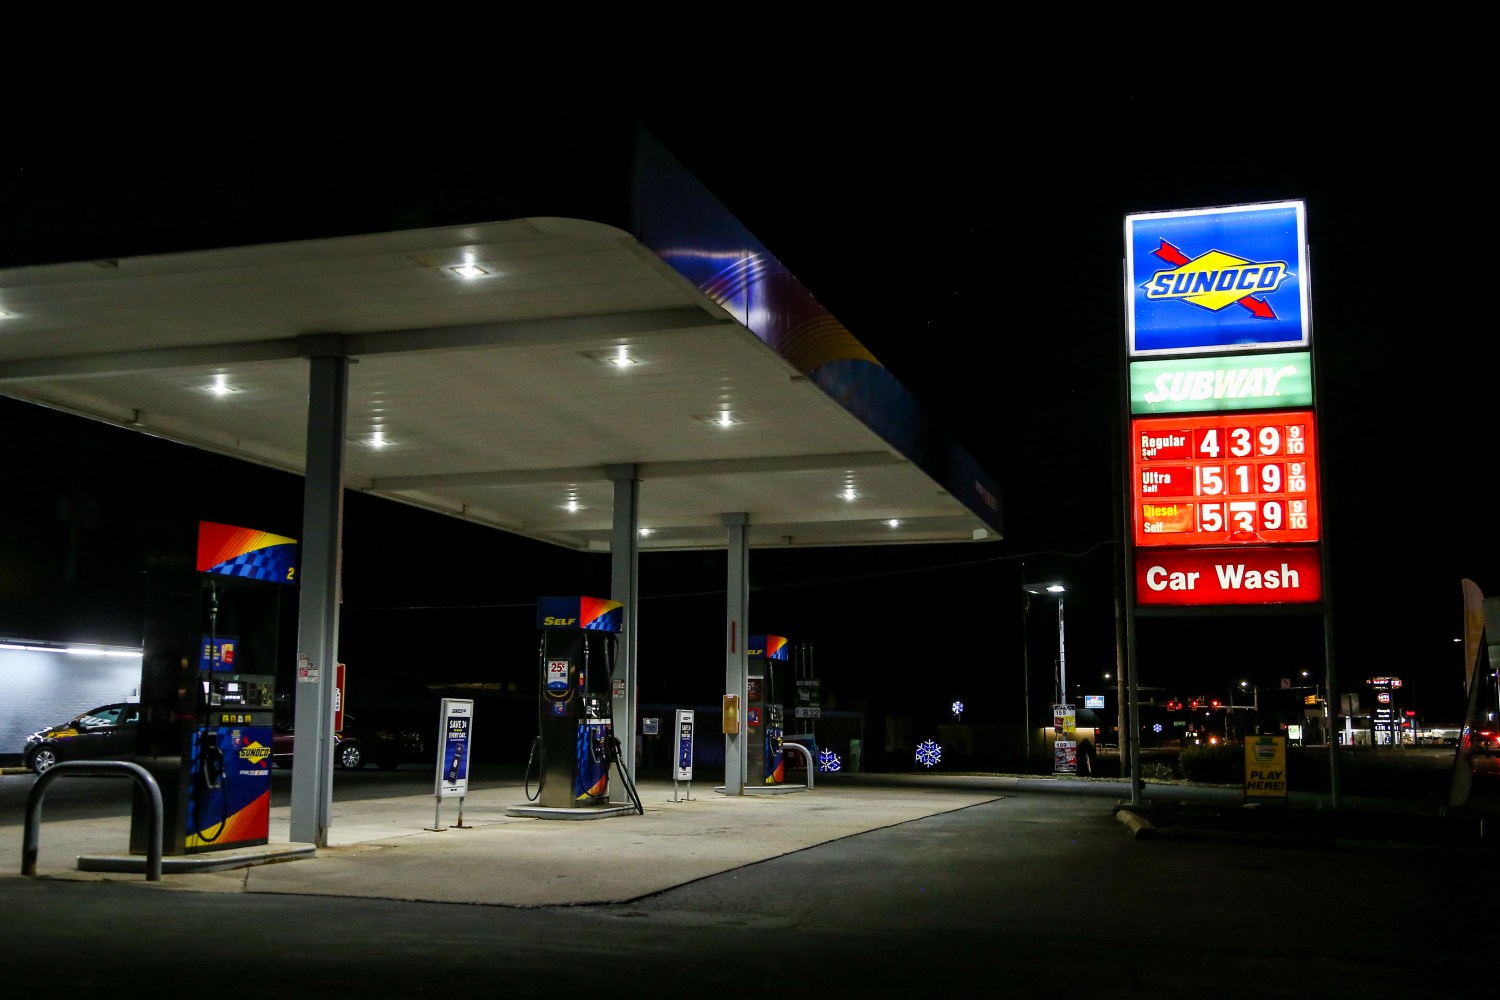 Gasoline prices are displayed at a Sunoco station in Elysburg, Pennsylvania, on March 8, 2022. AAA reported the national average price for a gallon of gas in the United States was a record high of $4.173 on March 8, 2022. (Photo by Paul Weaver/Sipa USA)No Use Germany.